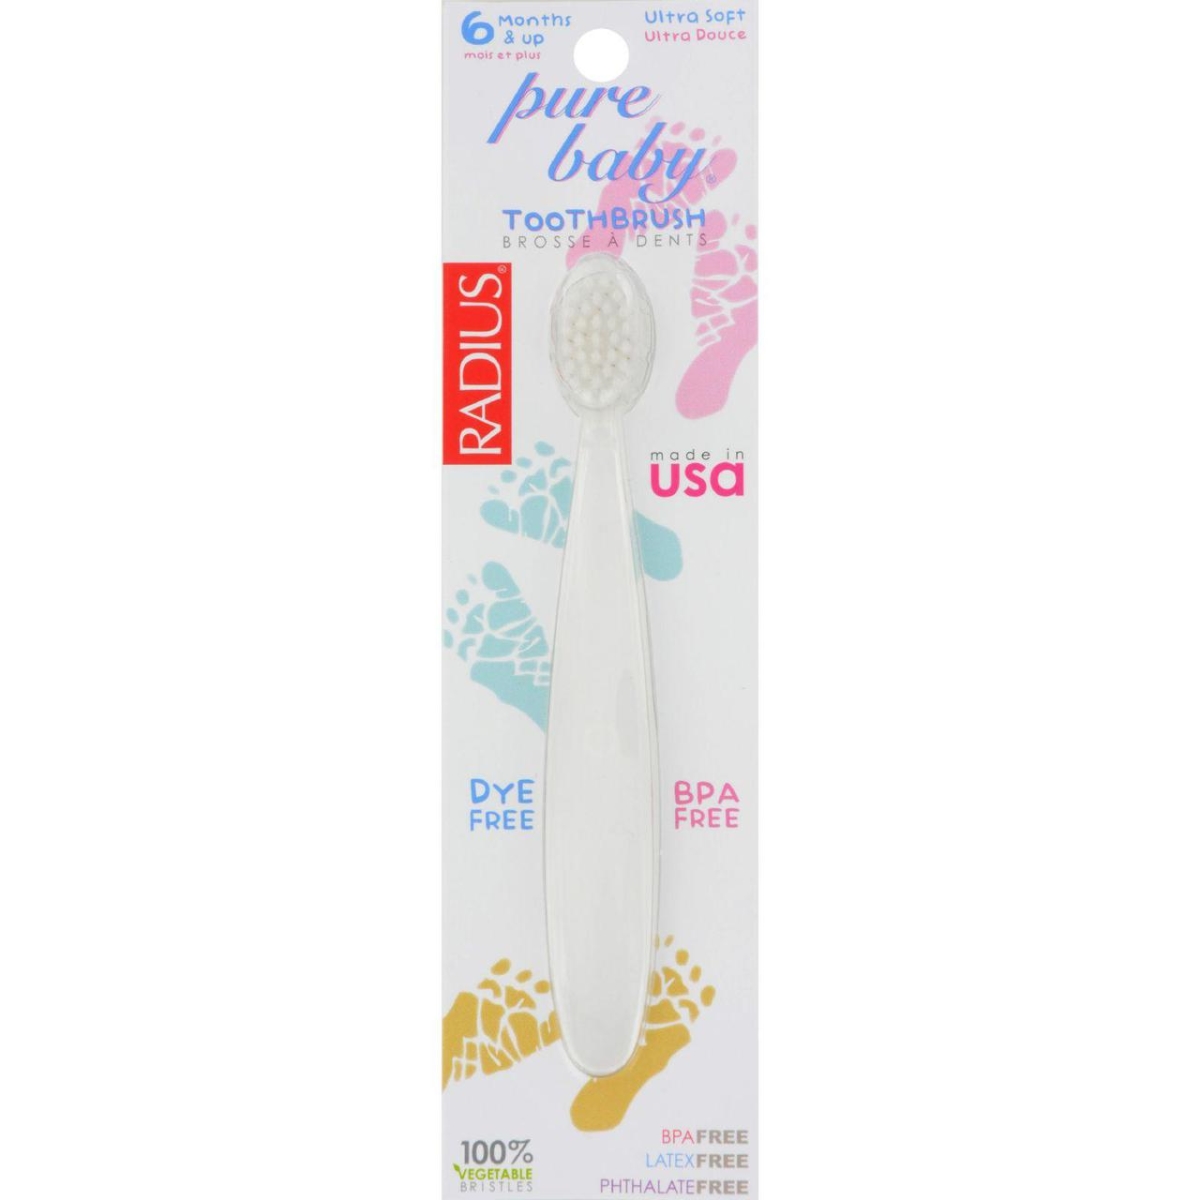 Hg0176131 Ultra Soft Pure Baby Toothbrush 6-18 Months - Case Of 6